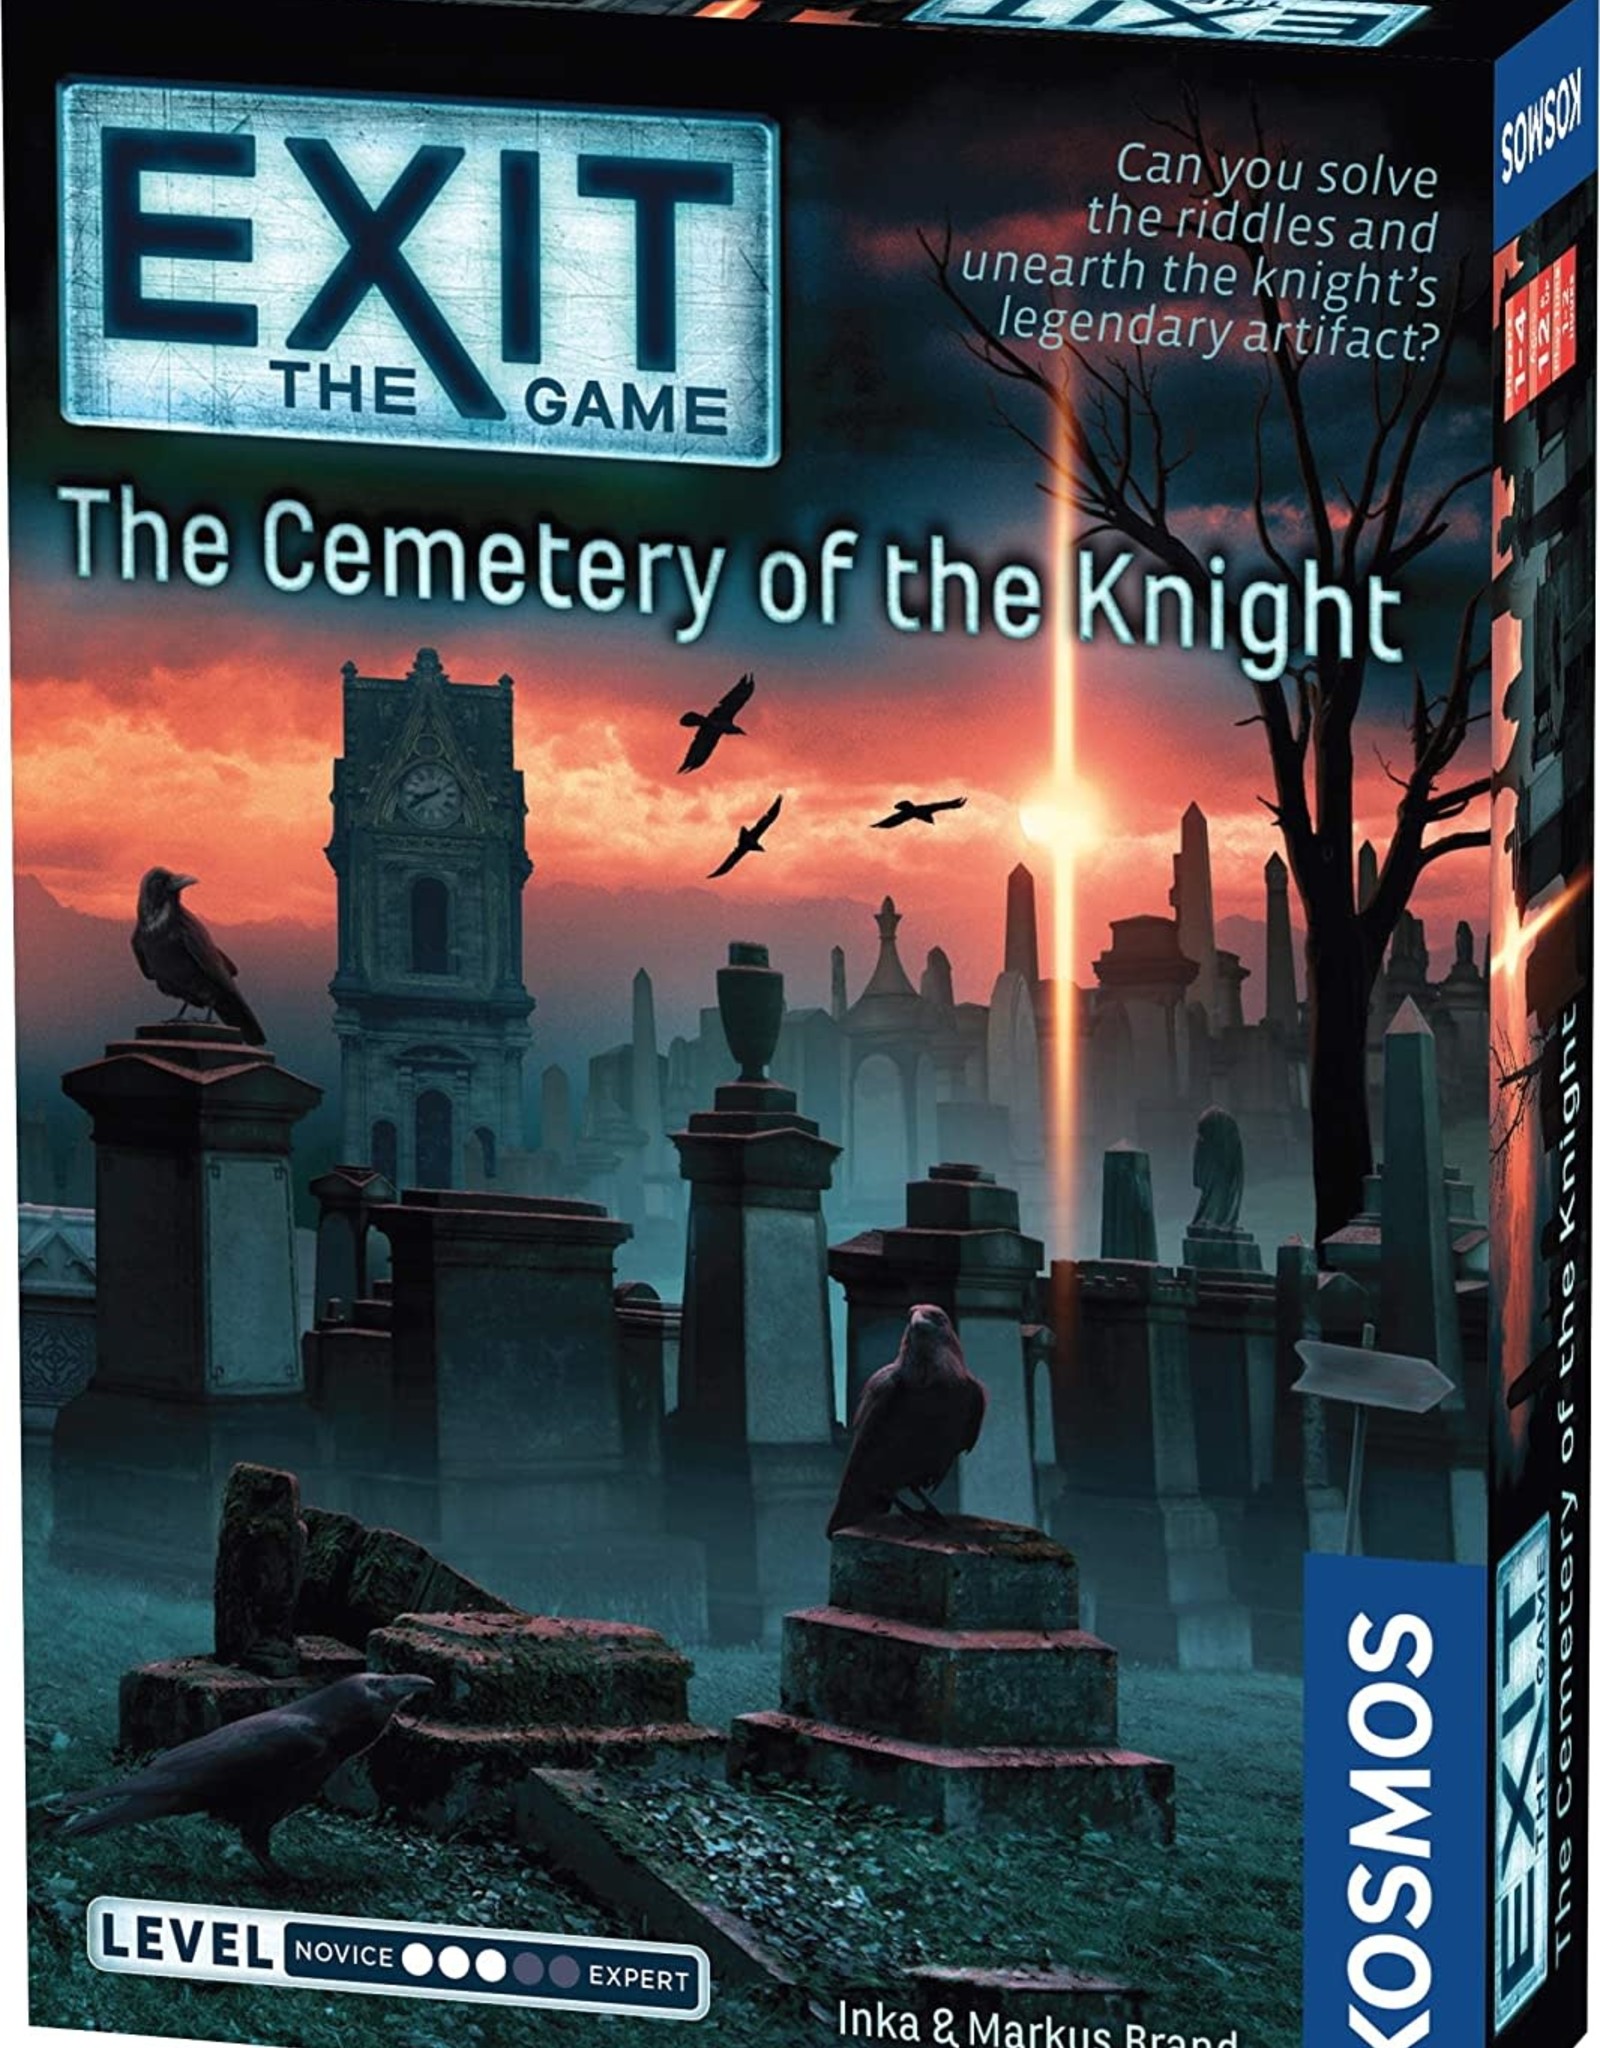 Thames & Kosmos Exit: The Cemetery of the Knight